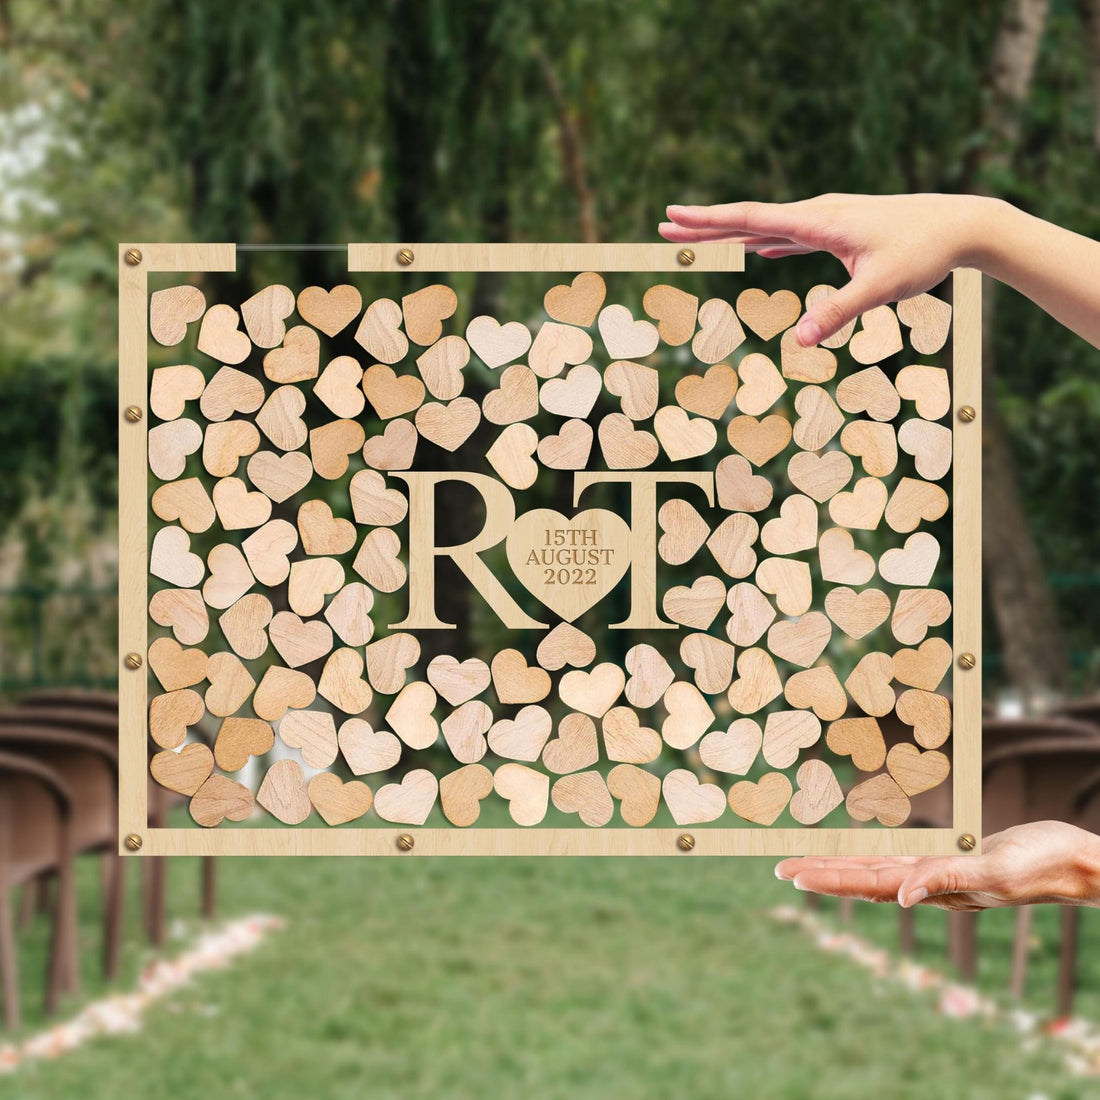 Custom Made Laser Cut Plywood & Acrylic Rectangle Wedding Chips Drop Box, Rustic Personalised Guest Book Alternative, Stationery Table Decor